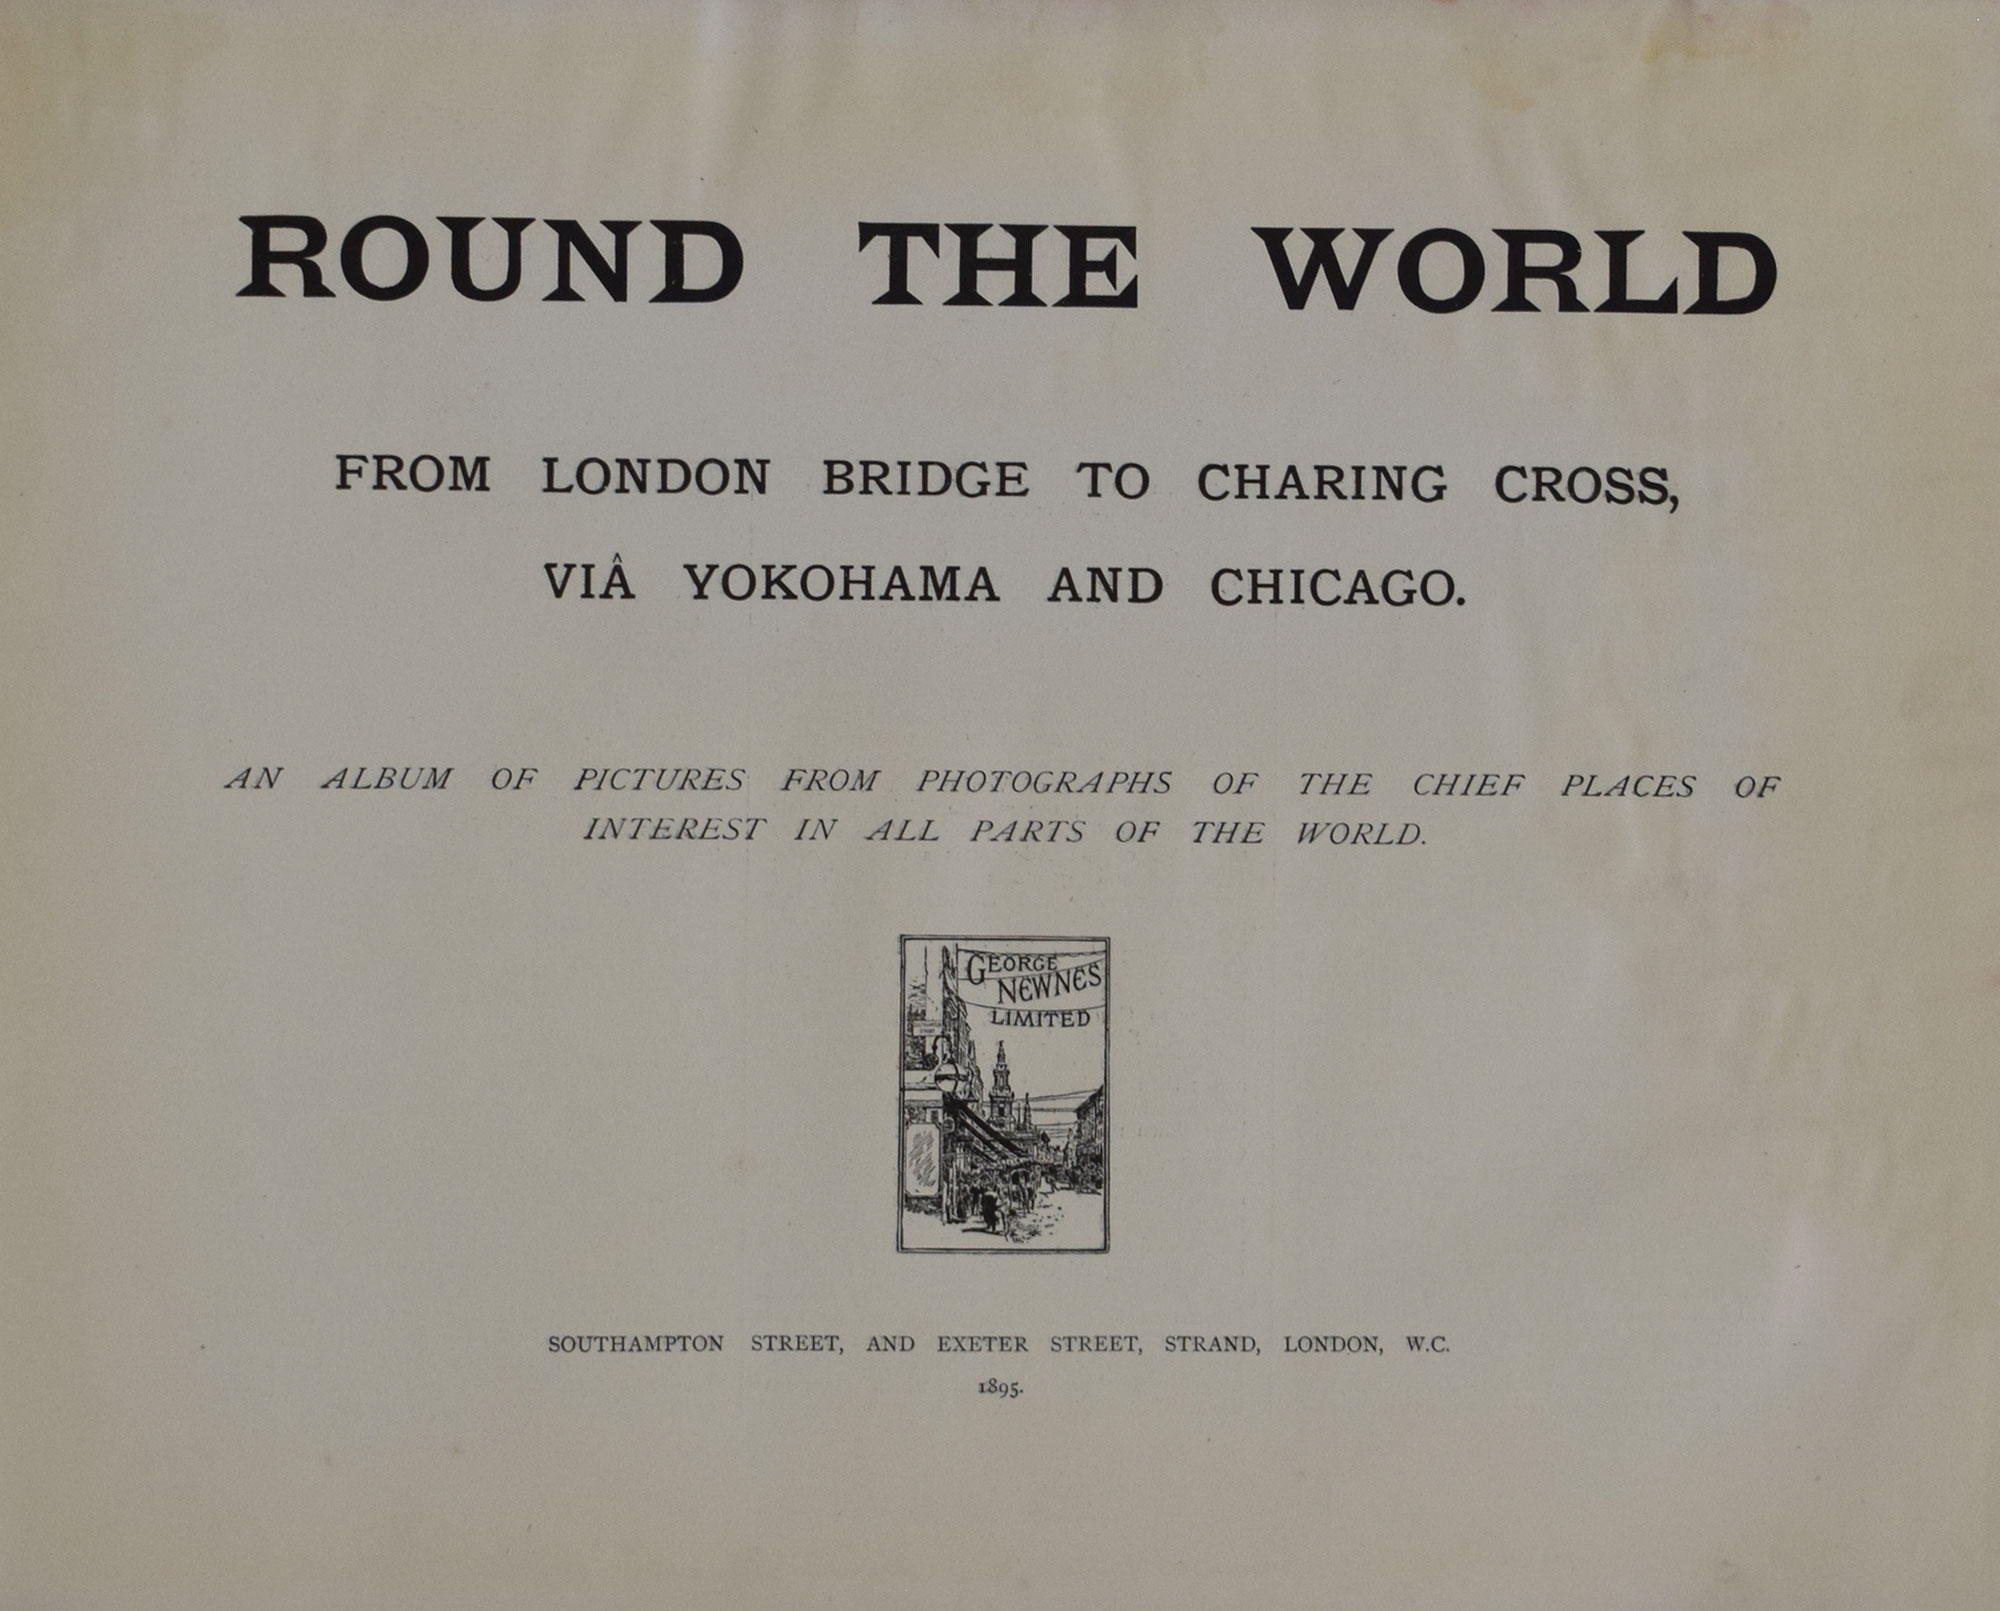 Round the World from London Bridge to Charing Cross, via Yokohama and Chicago: An Album of Pictures from Photographs of the Chief Places of Interest in All Parts of the World.